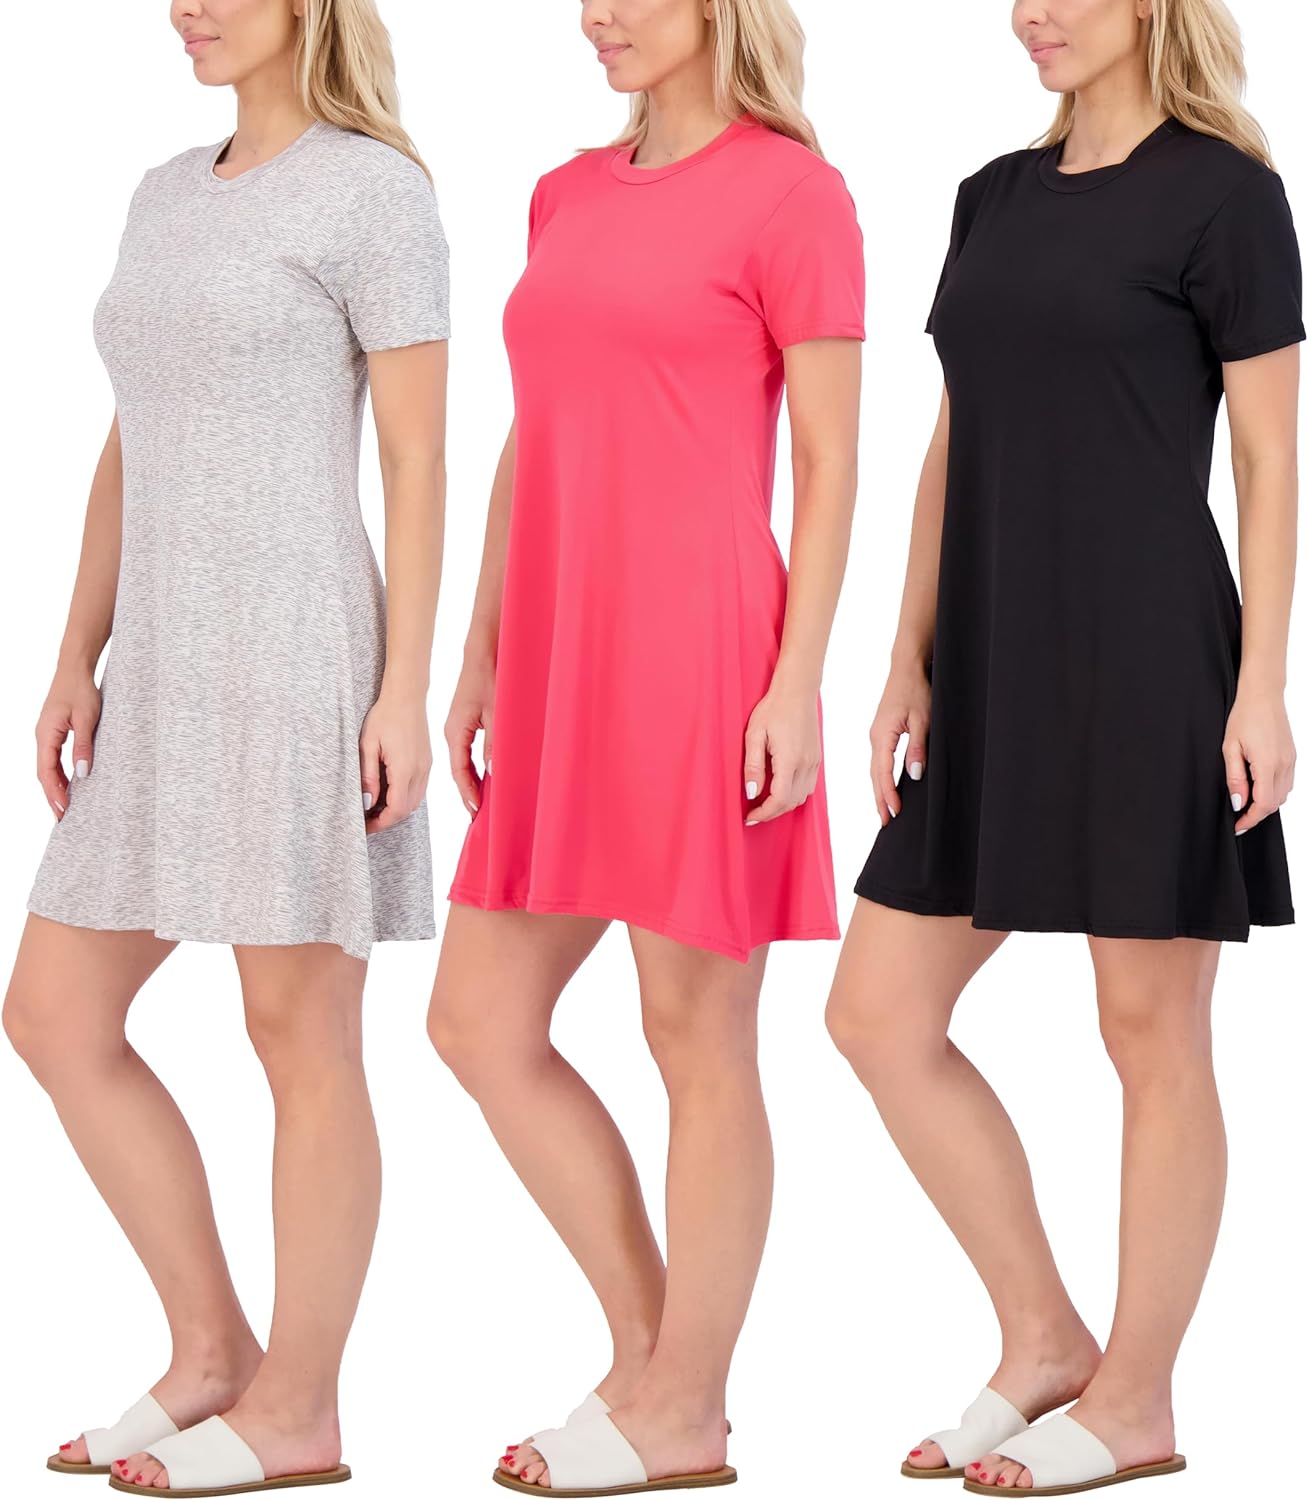 I recently purchased the 3-Pack of Women' Soft Lounge Swing Casual T-Shirt Dresses, and I couldn't be more delighted with my decision. These dresses are a game-changer when it comes to combining comfort, style, and versatility.First and foremost, the fabric is incredibly soft and luxurious against the skin. It feels like a gentle hug, making these dresses perfect for lounging around the house or running errands. The material is also breathable, ensuring that I stay comfortable all day long. It'